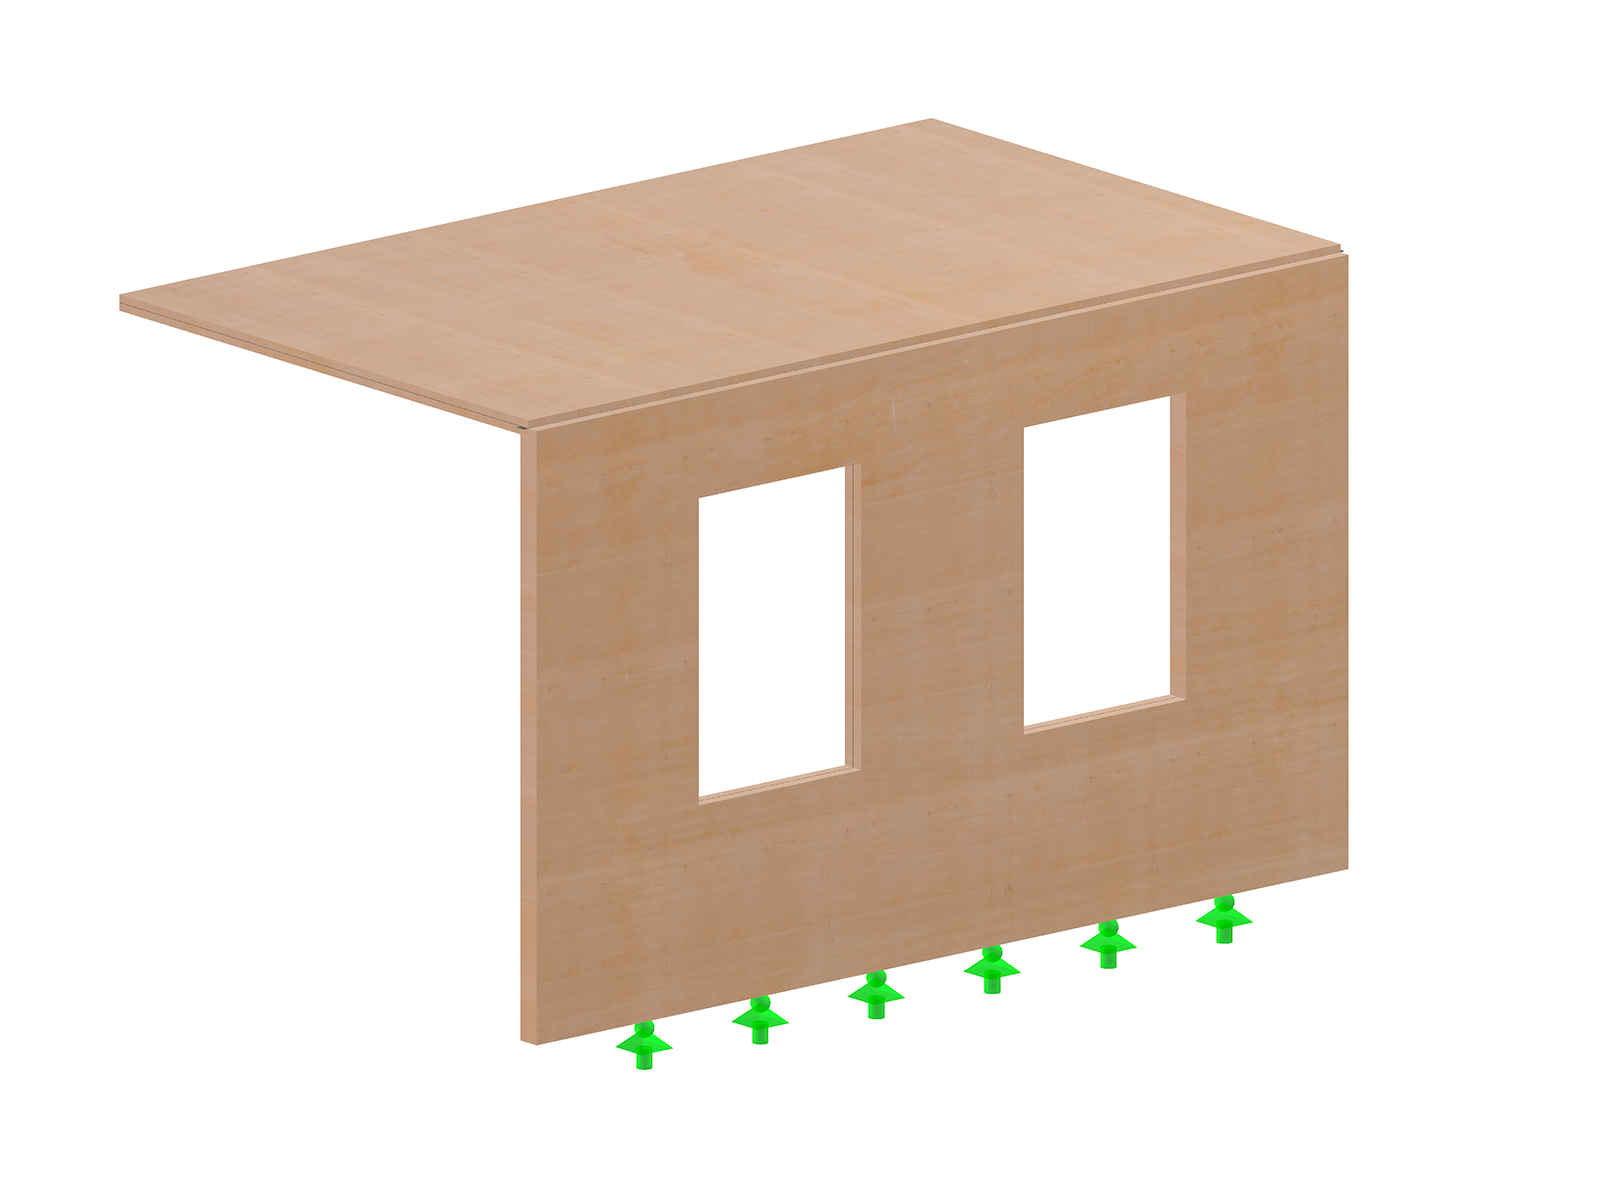 Model 005014 | Extension Made of Flat Timber Components